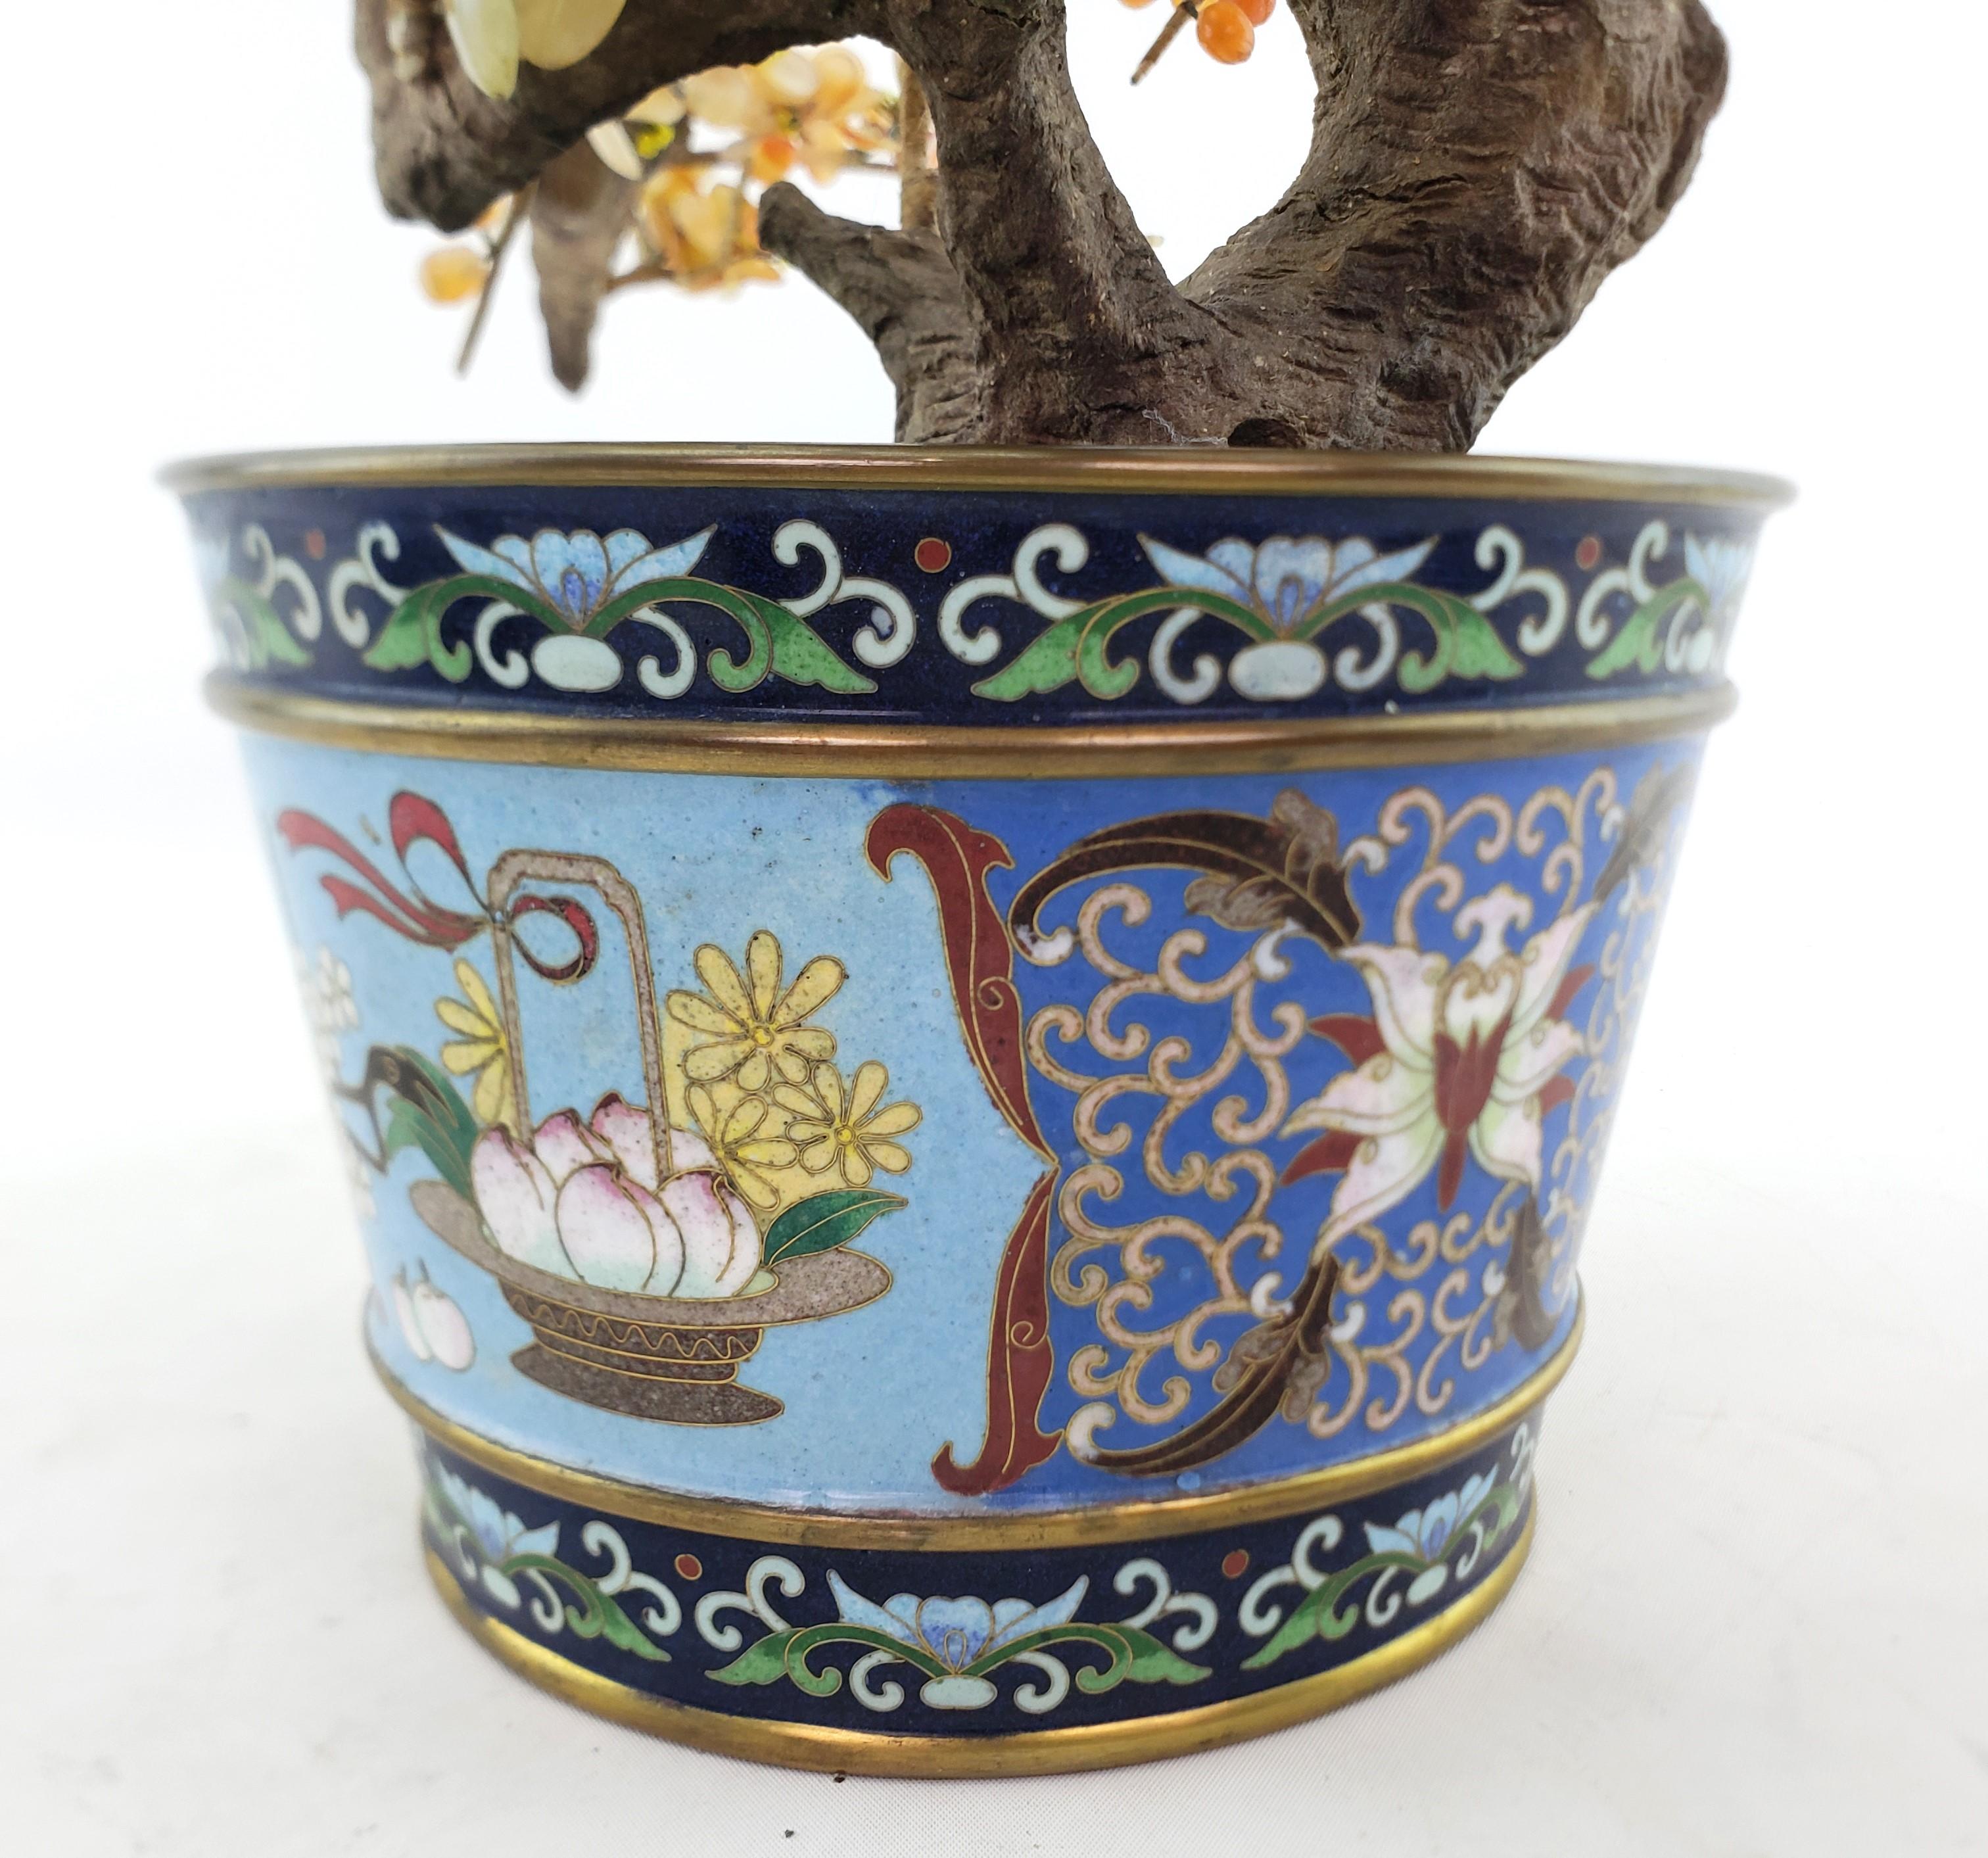 Antique Chinese Bonzai Styled Flowering Fruit Tree Sculpture with Cloisonne Pot For Sale 6